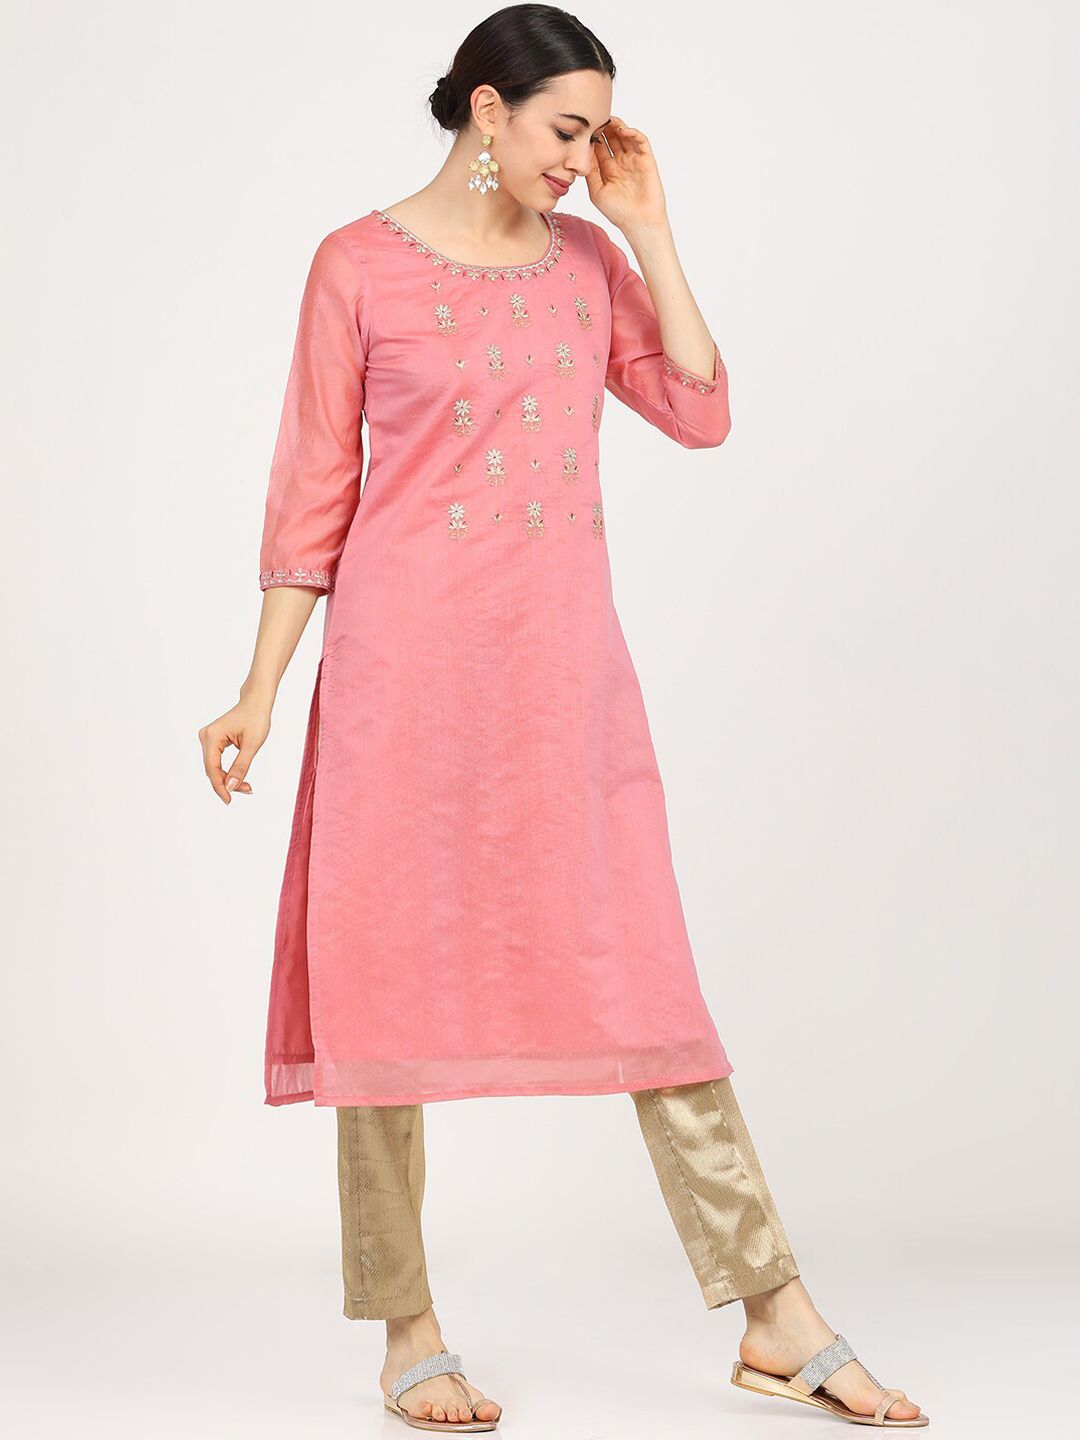 Vishudh Women Pink & Gold-Toned Floral Embroidered Kurta Price in India